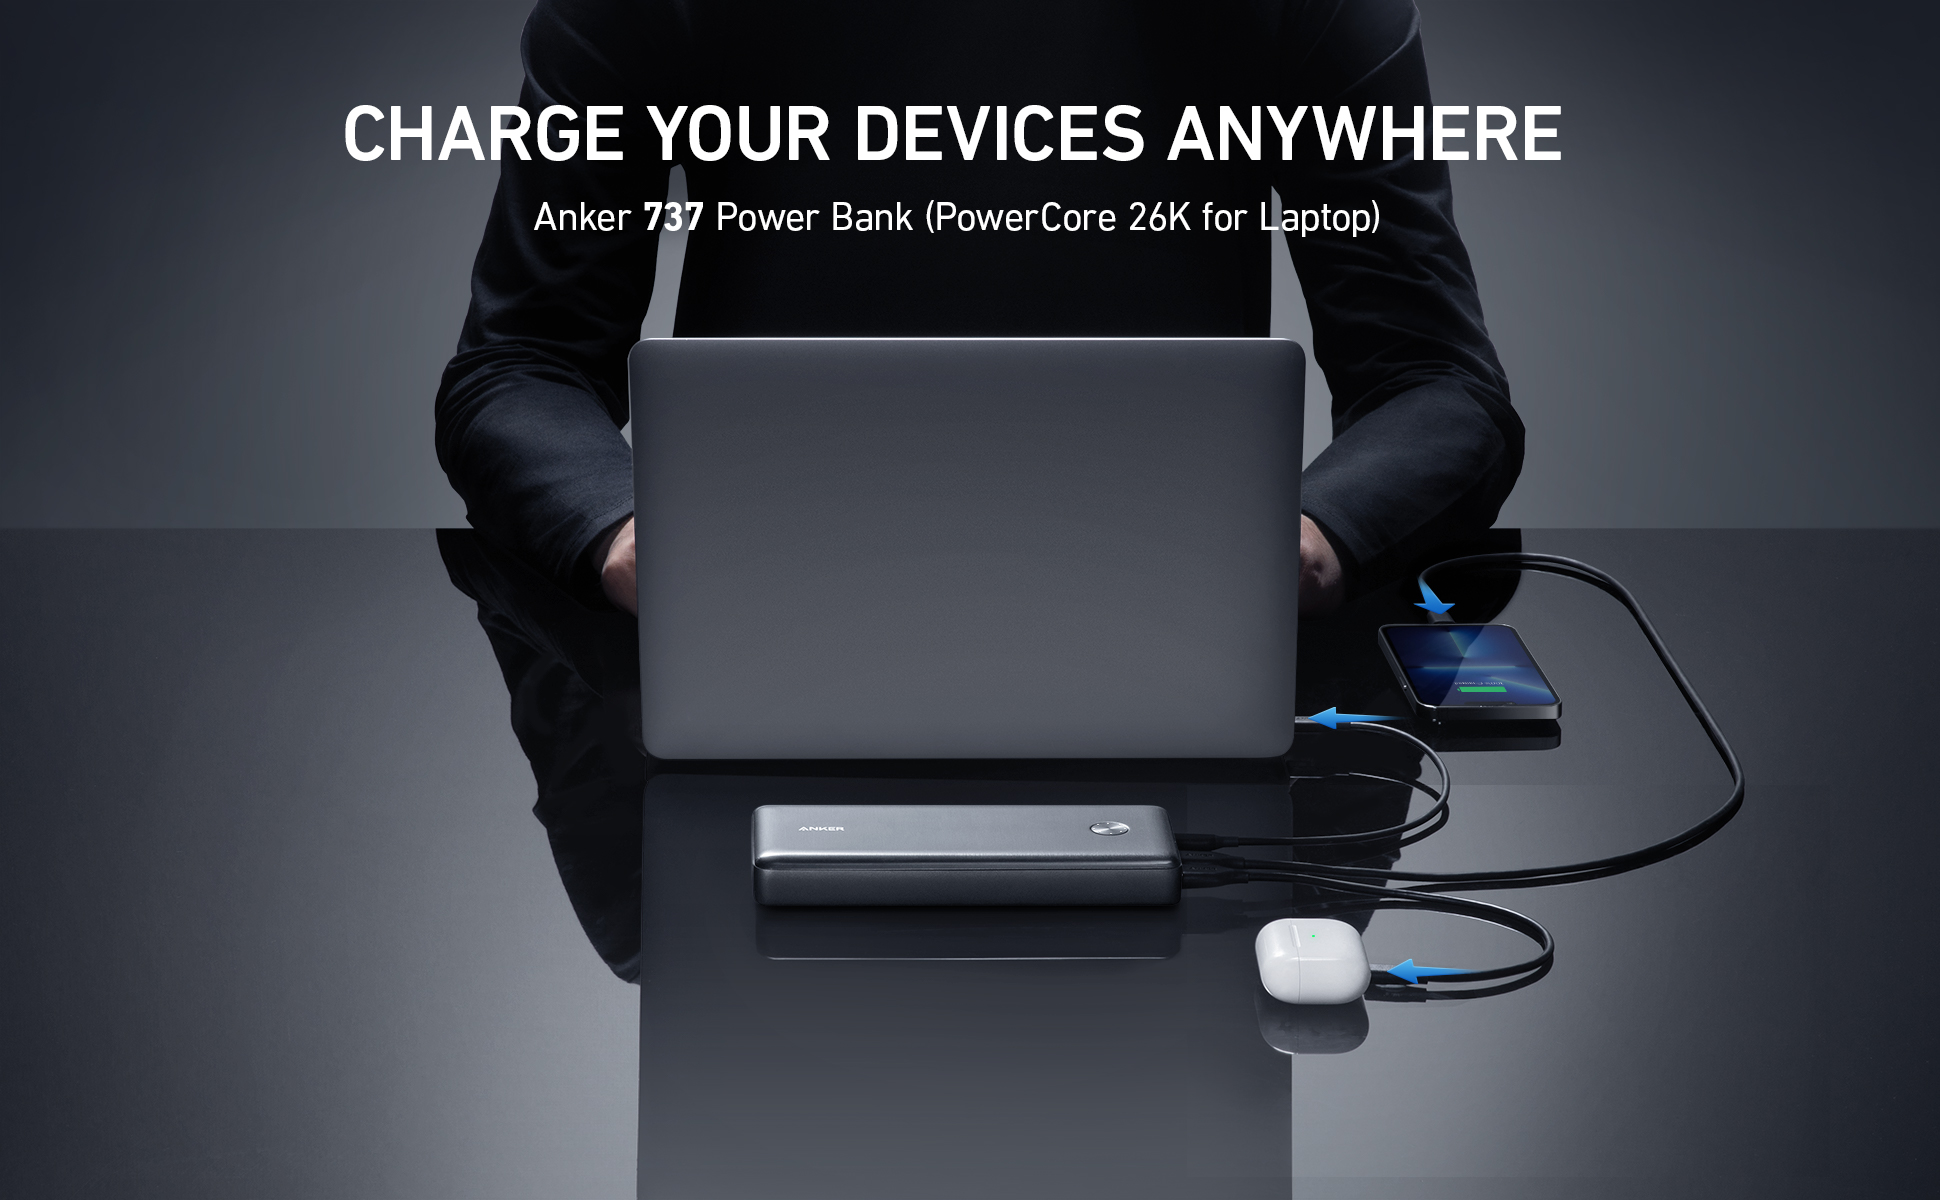 How to Charge Your Laptop with an Anker Power Bank